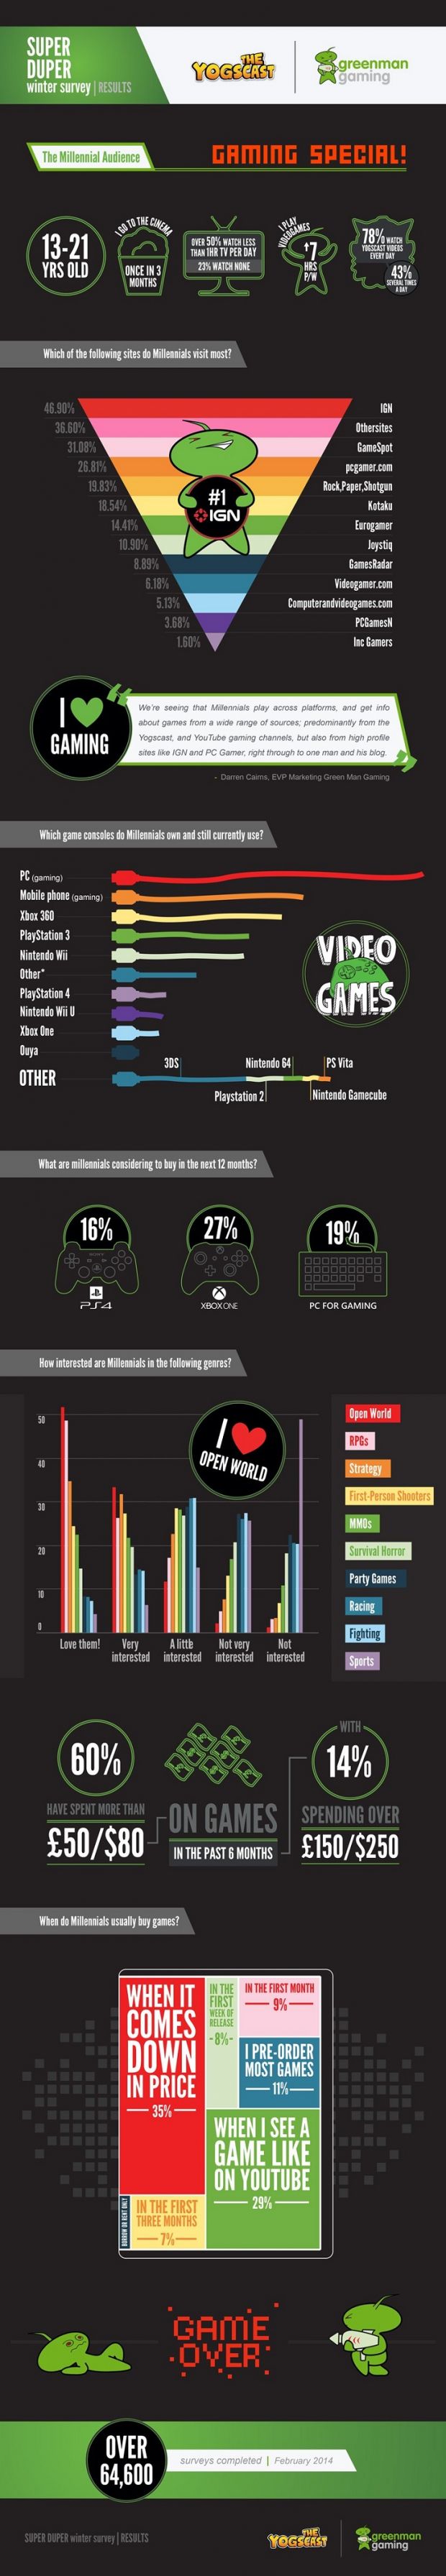 The super duper gaming special infographic